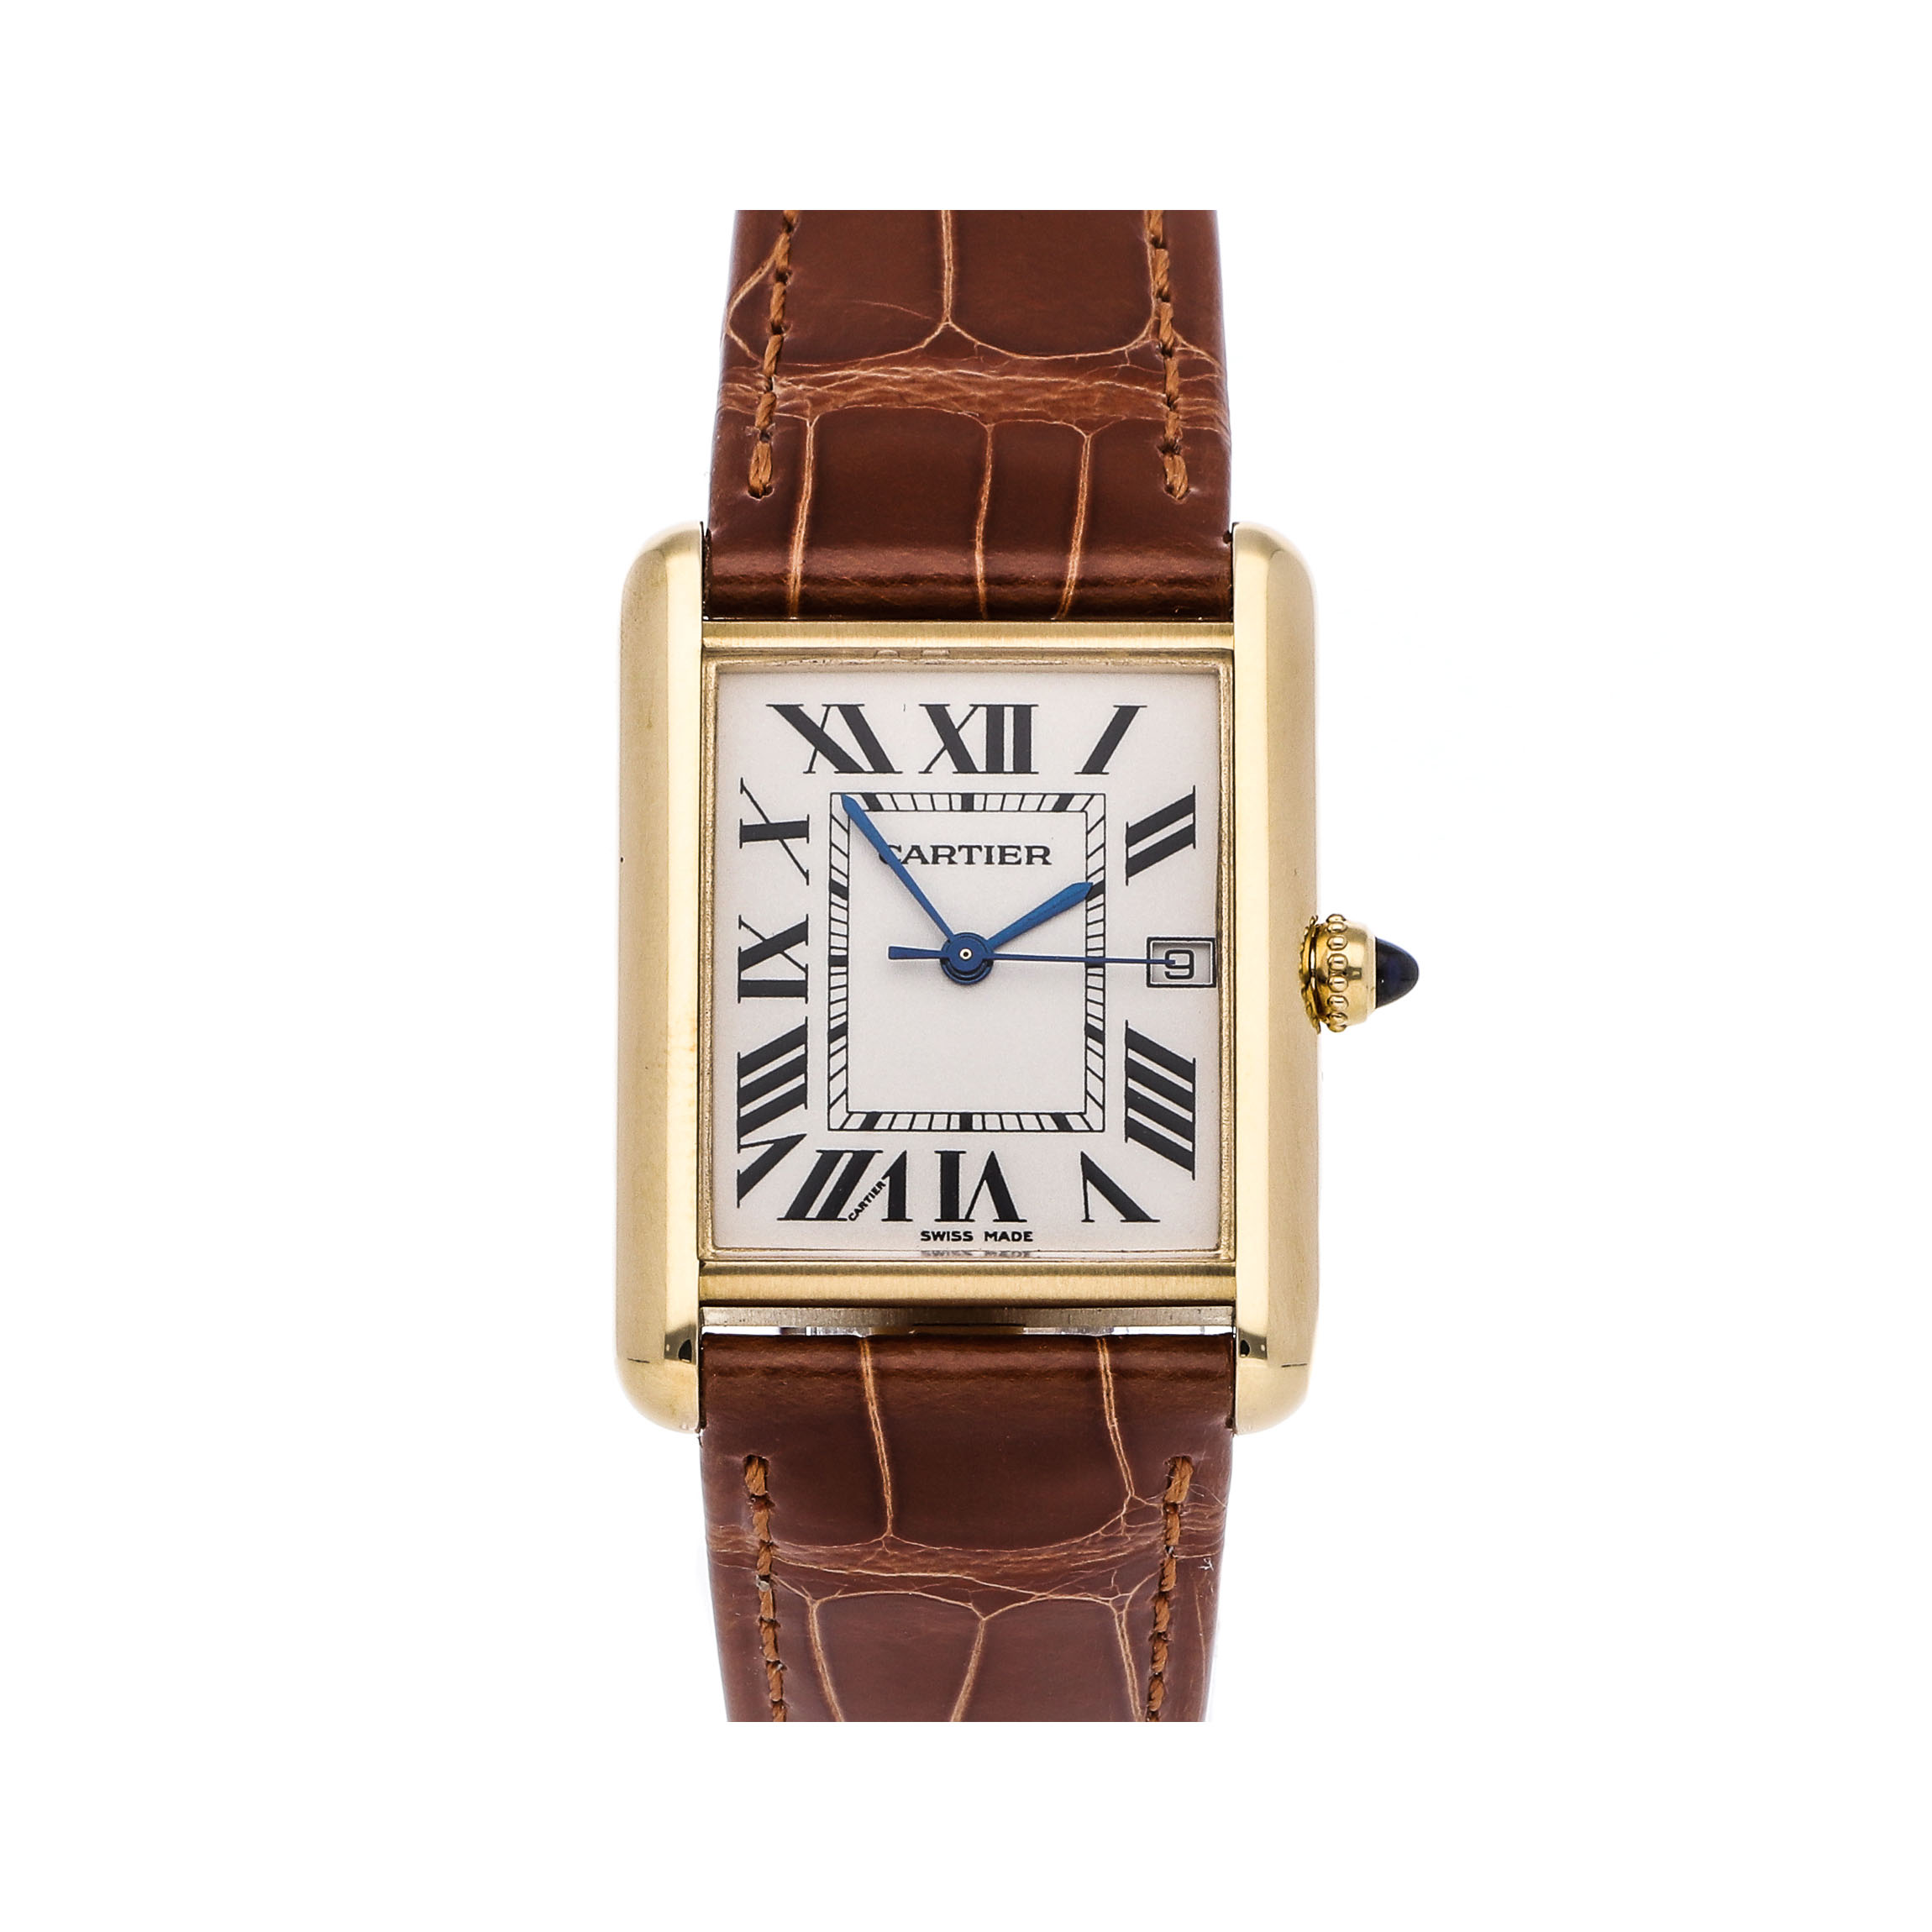 pre owned ladies cartier watches uk